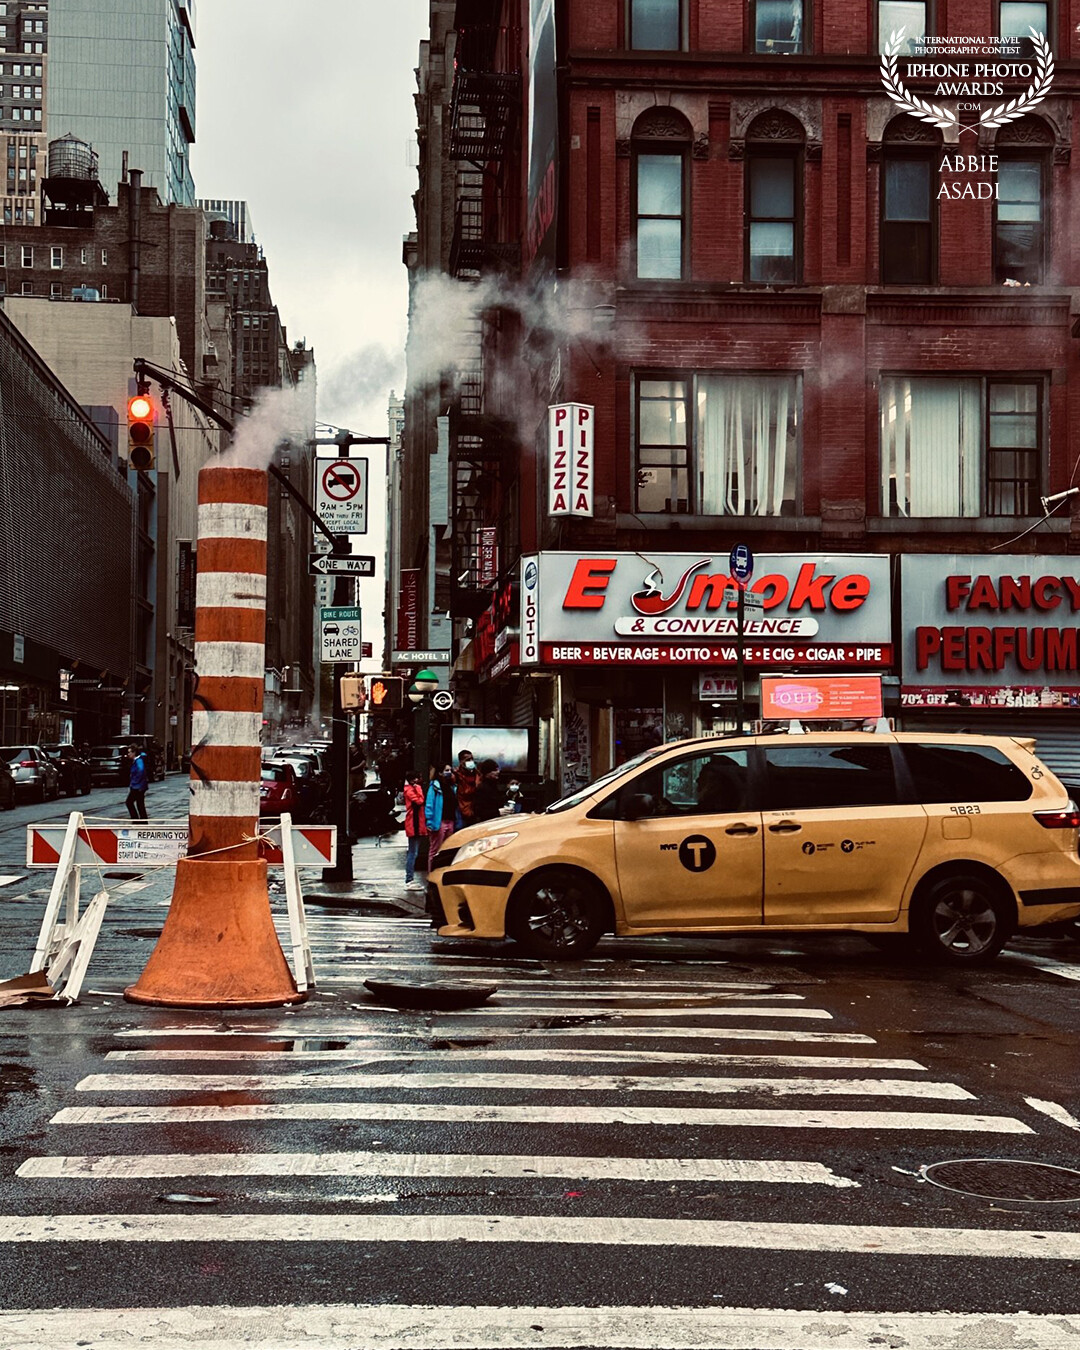 New York City. How many cliches can we fit into one photograph?